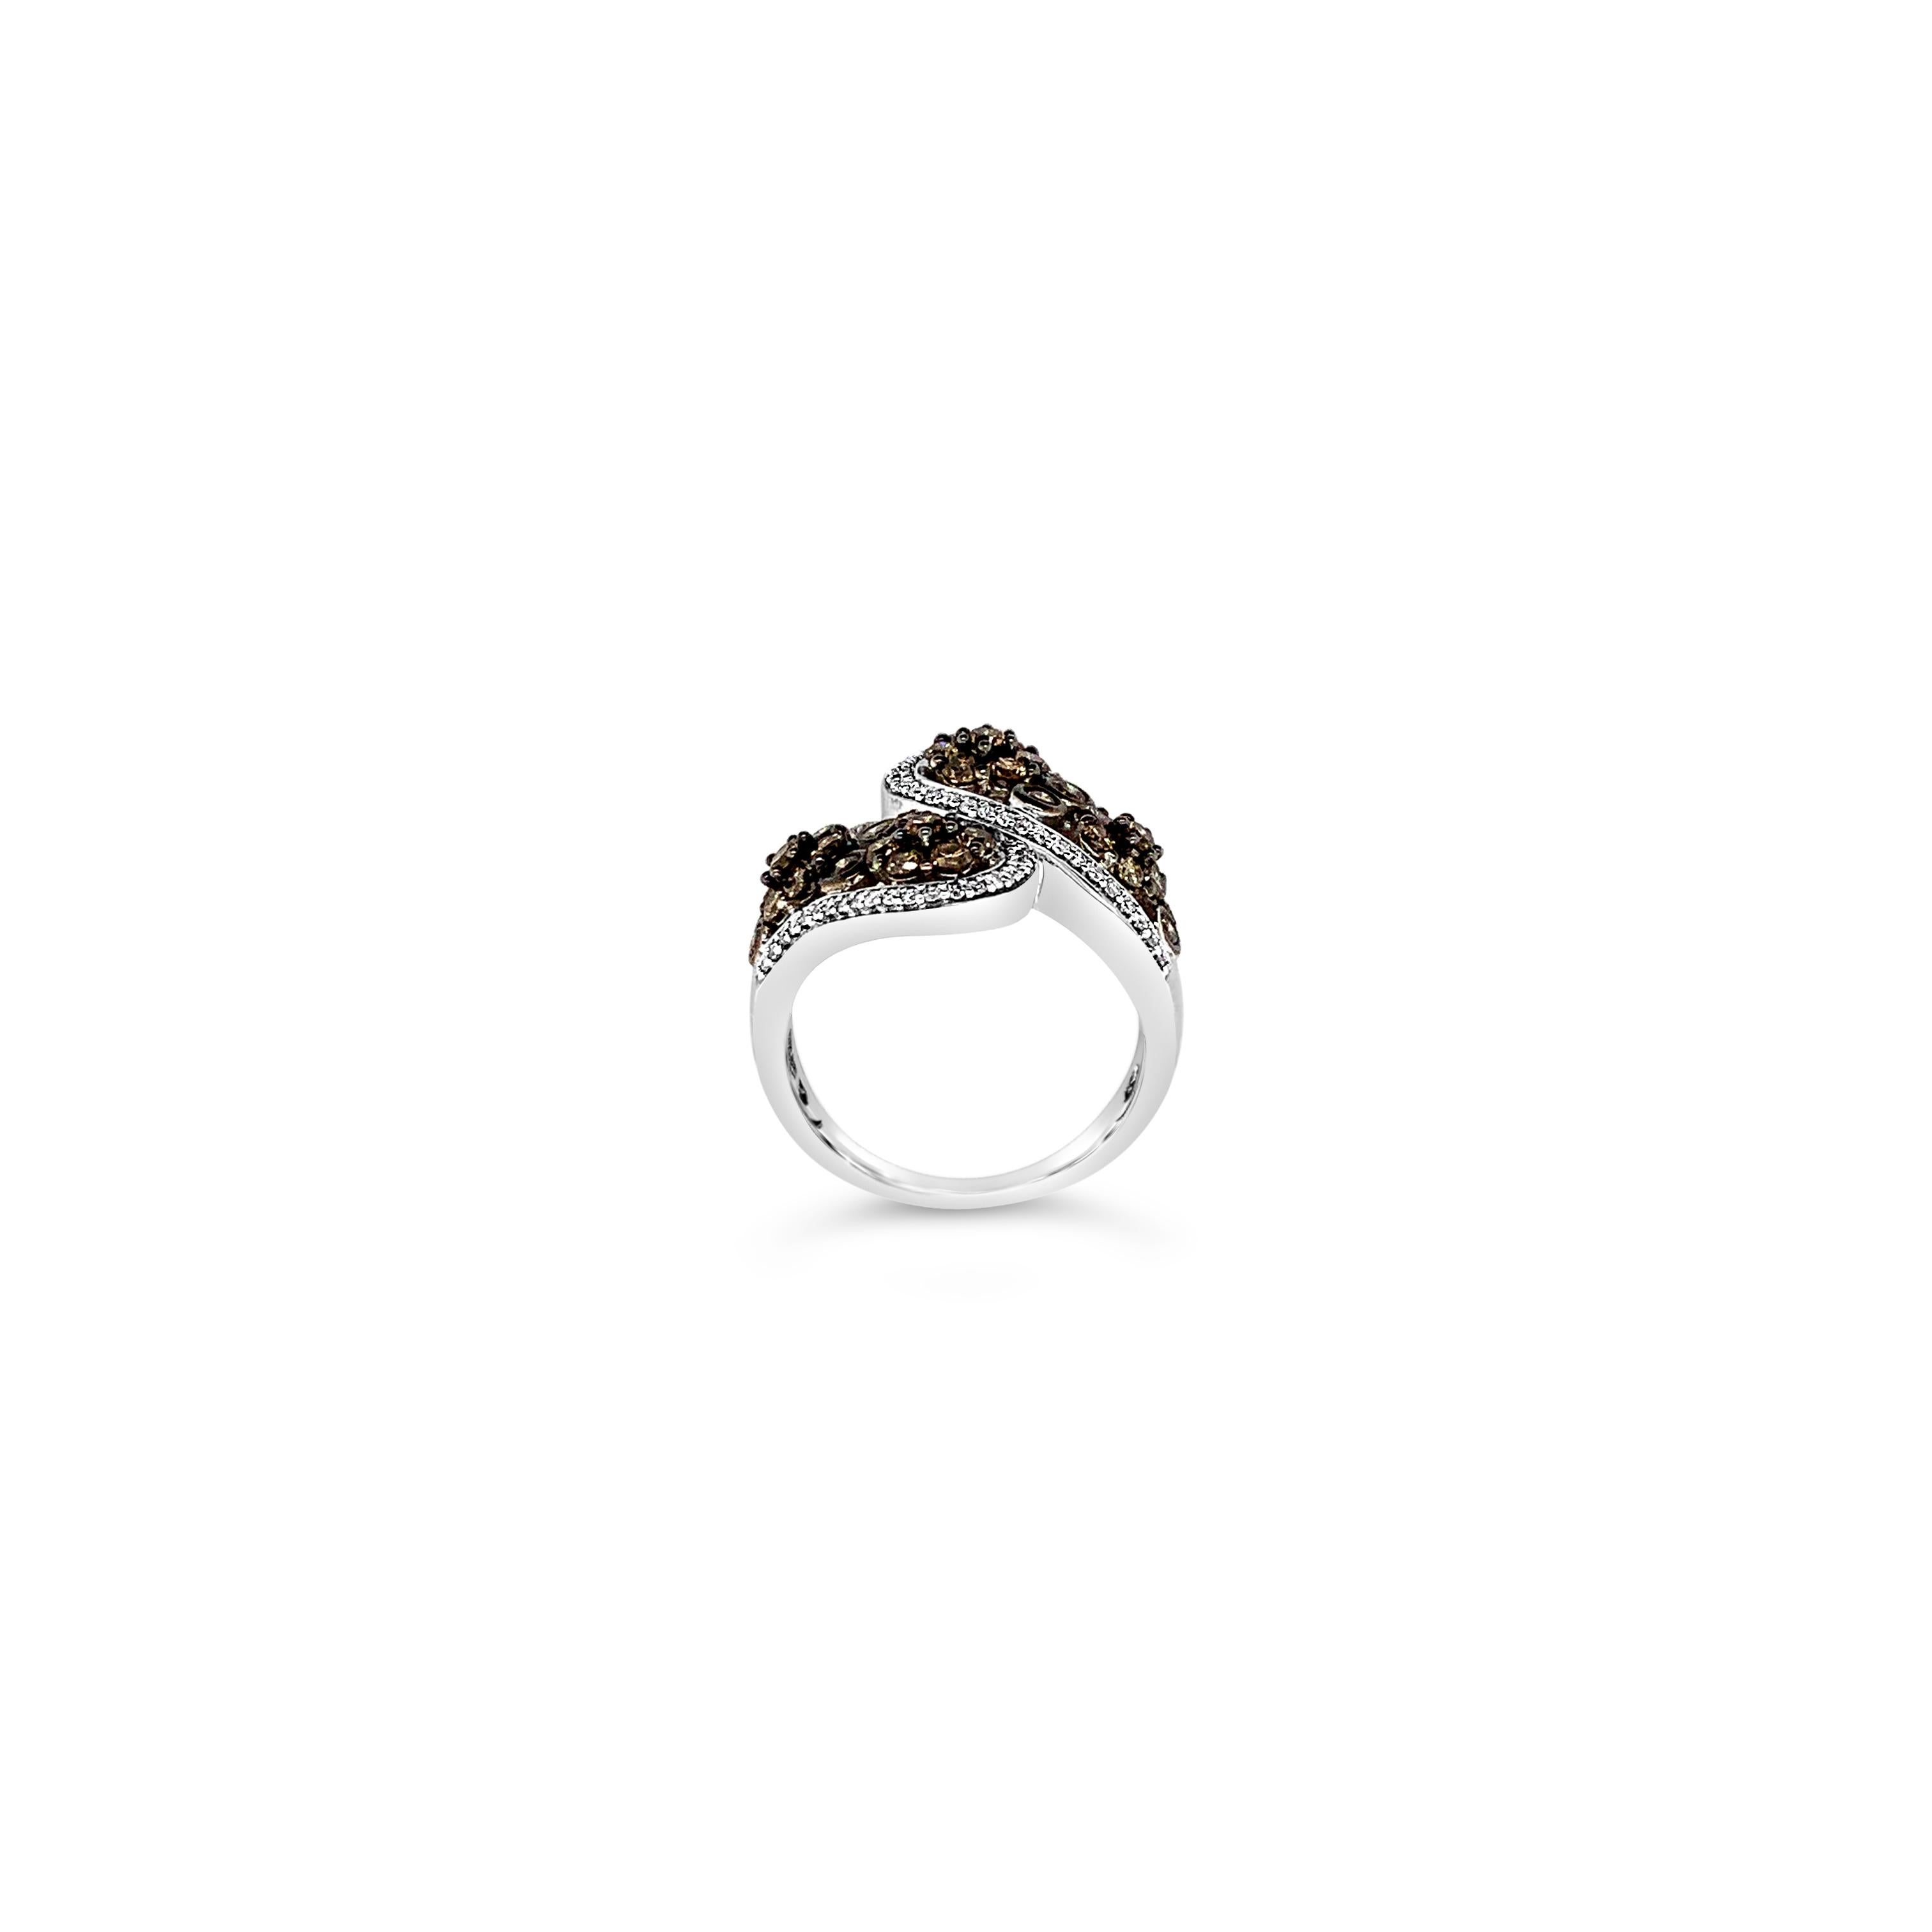 Le Vian® Ring featuring 1.16 cts. Chocolate Diamonds®, .25 cts. Vanilla Diamonds® set in 14K Vanilla Gold®

Diamonds Breakdown:
1.16 cts Brown Diamonds
.25 cts White Diamonds

Gems Breakdown:
None

Ring may or may not be sizable, please feel free to